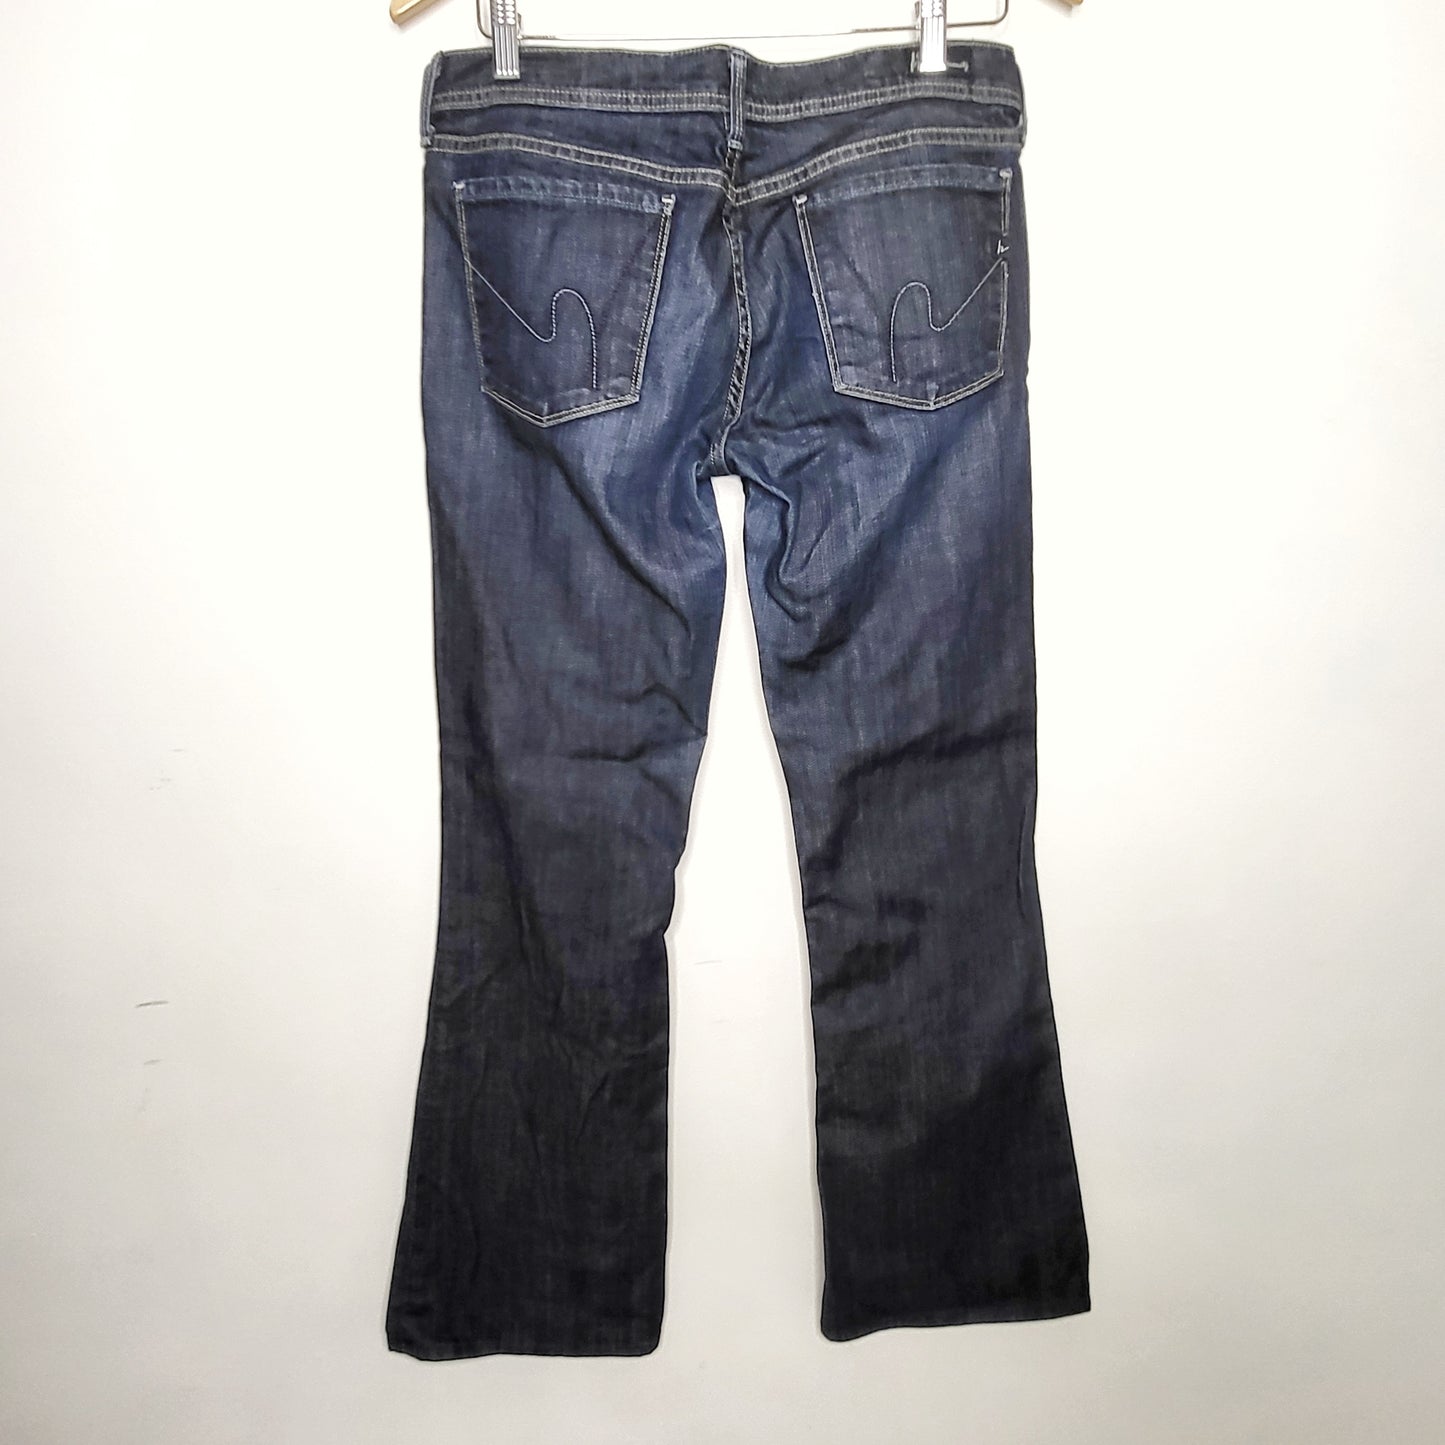 JBAB2 - Citizens of Humanity 002 Stretch Ingrid low waist flare jeans, size 31, good condition